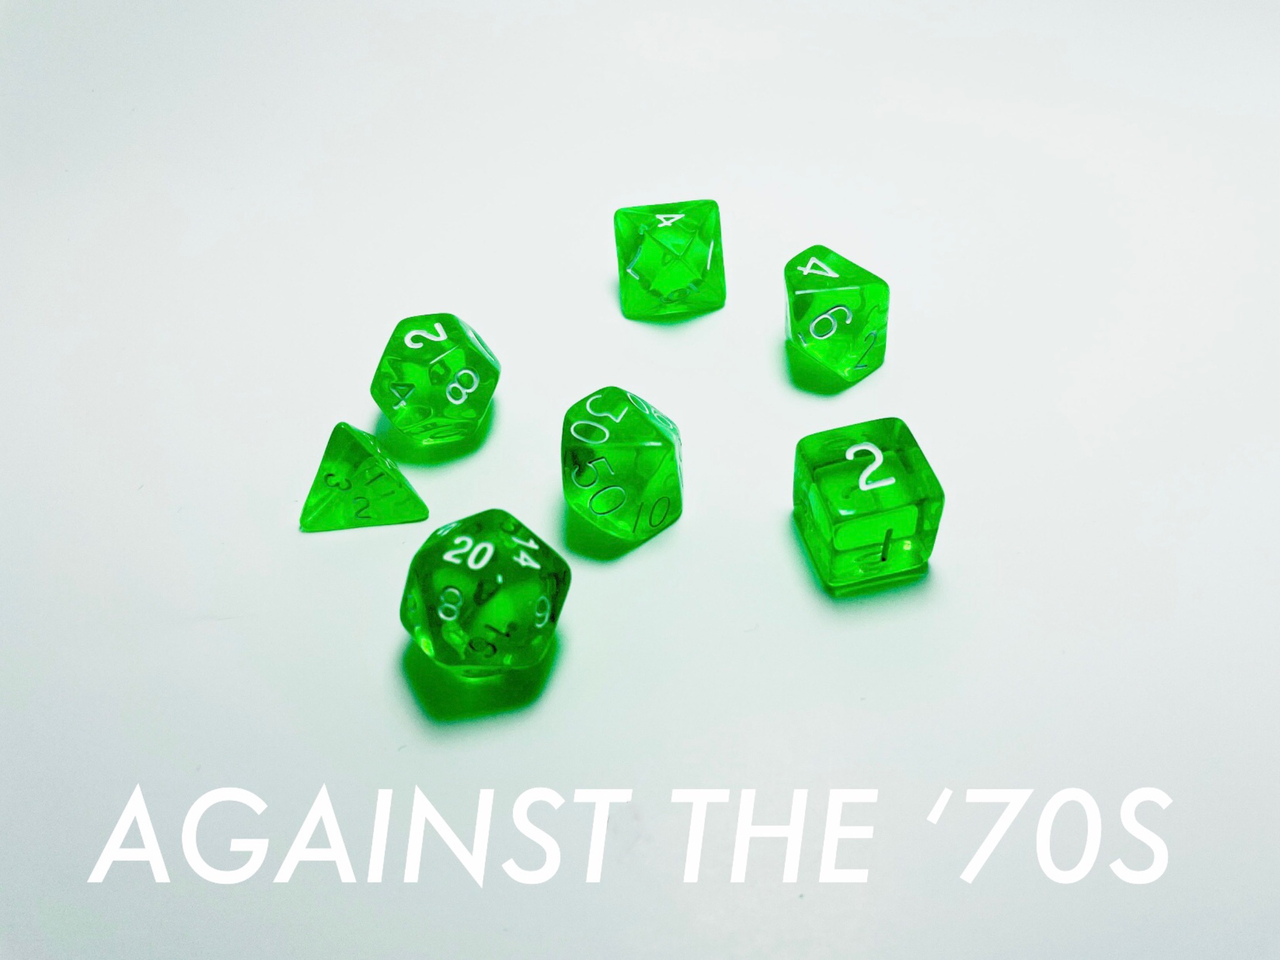 Against the '70s